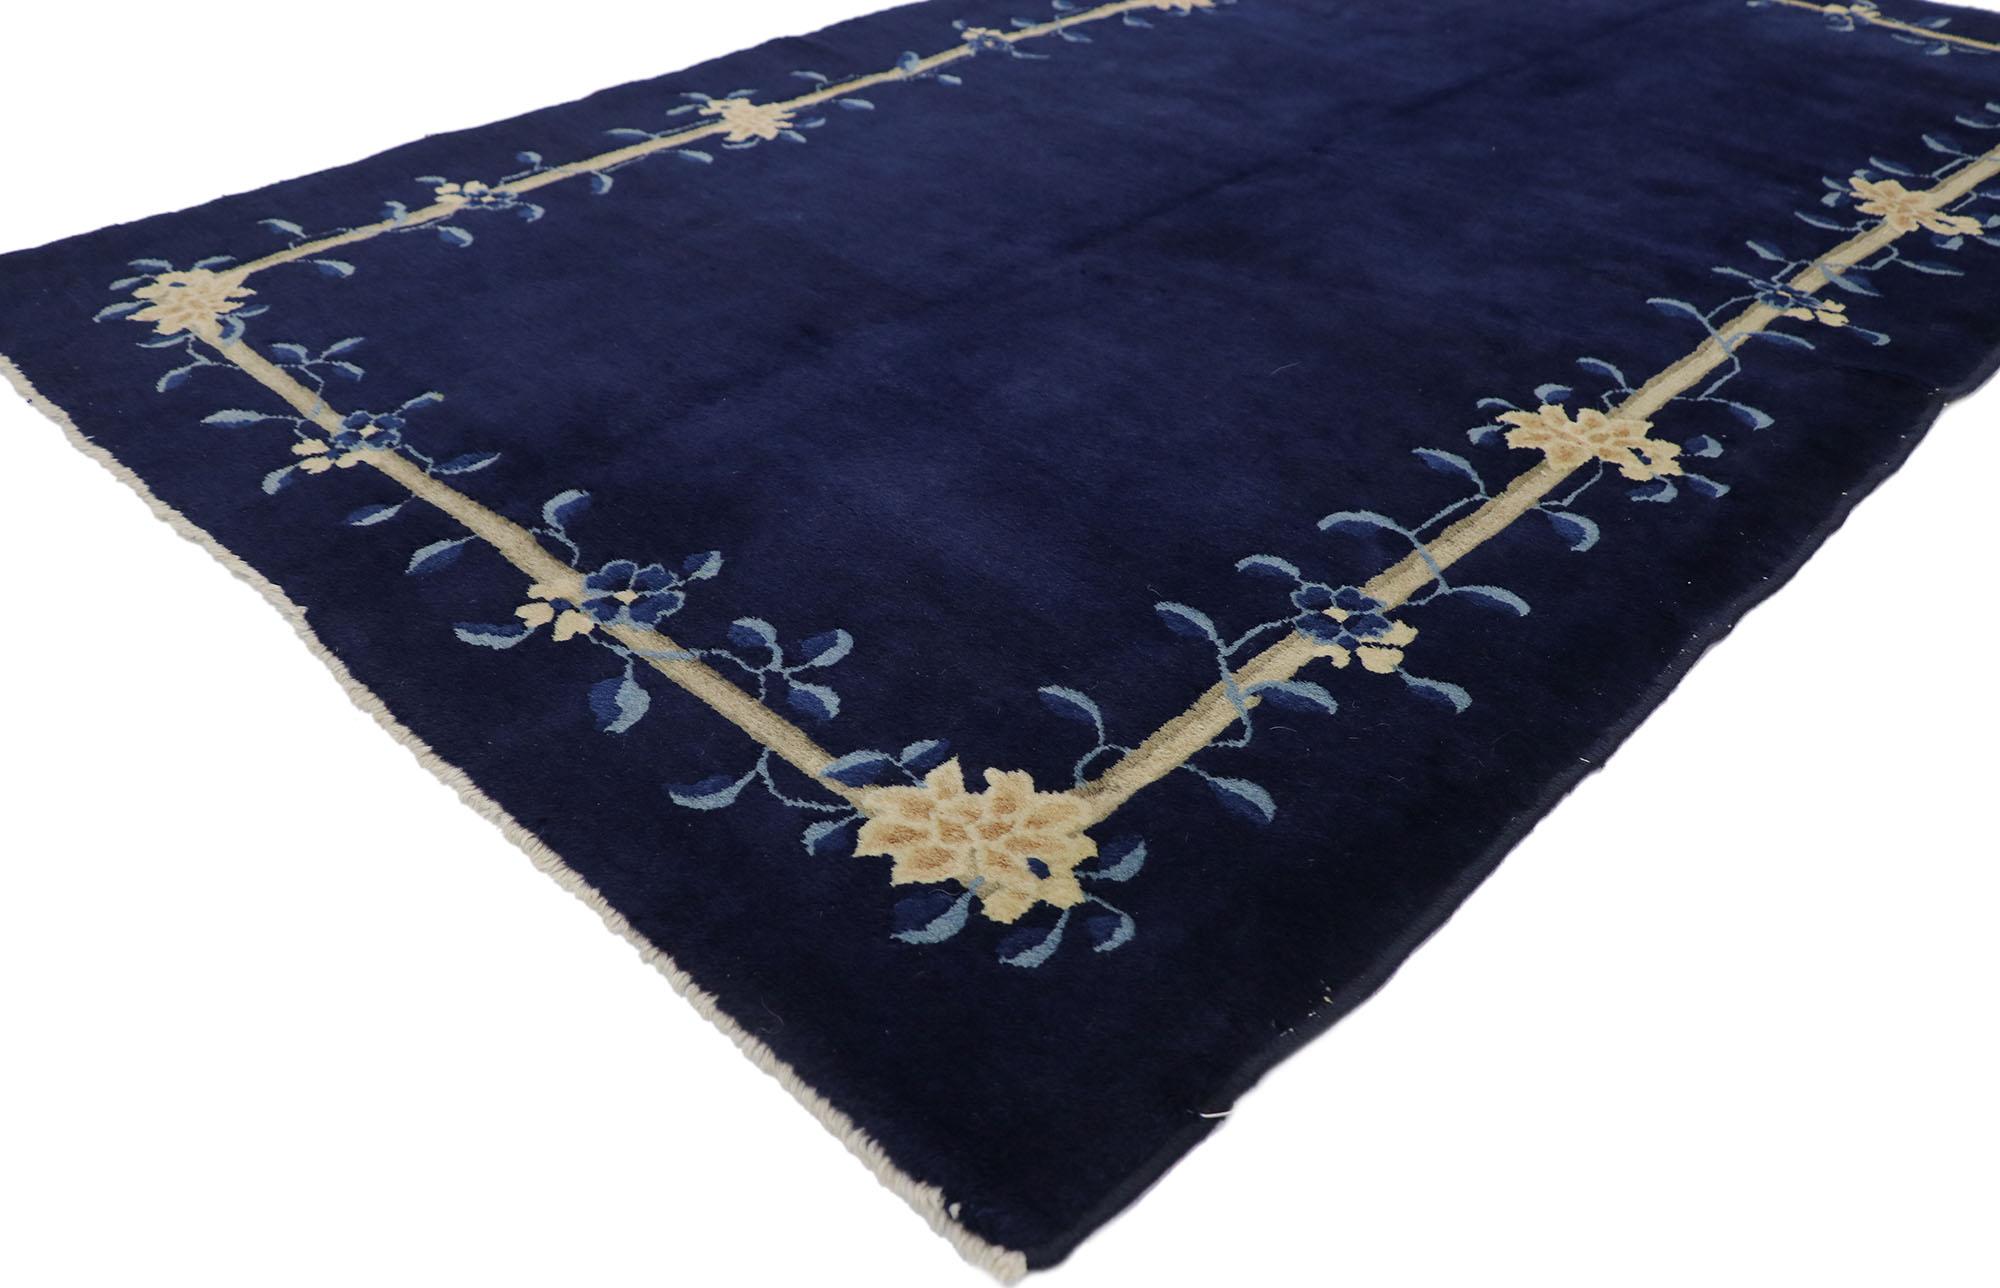 78123 Vintage Chinese Peking Rug with Chinoiserie Style 04'00 x 06'08. With its effortless beauty and timeless Chinoiserie style, this hand-knotted wool vintage Chinese Peking rug will take on a curated lived-in look that feels timeless while